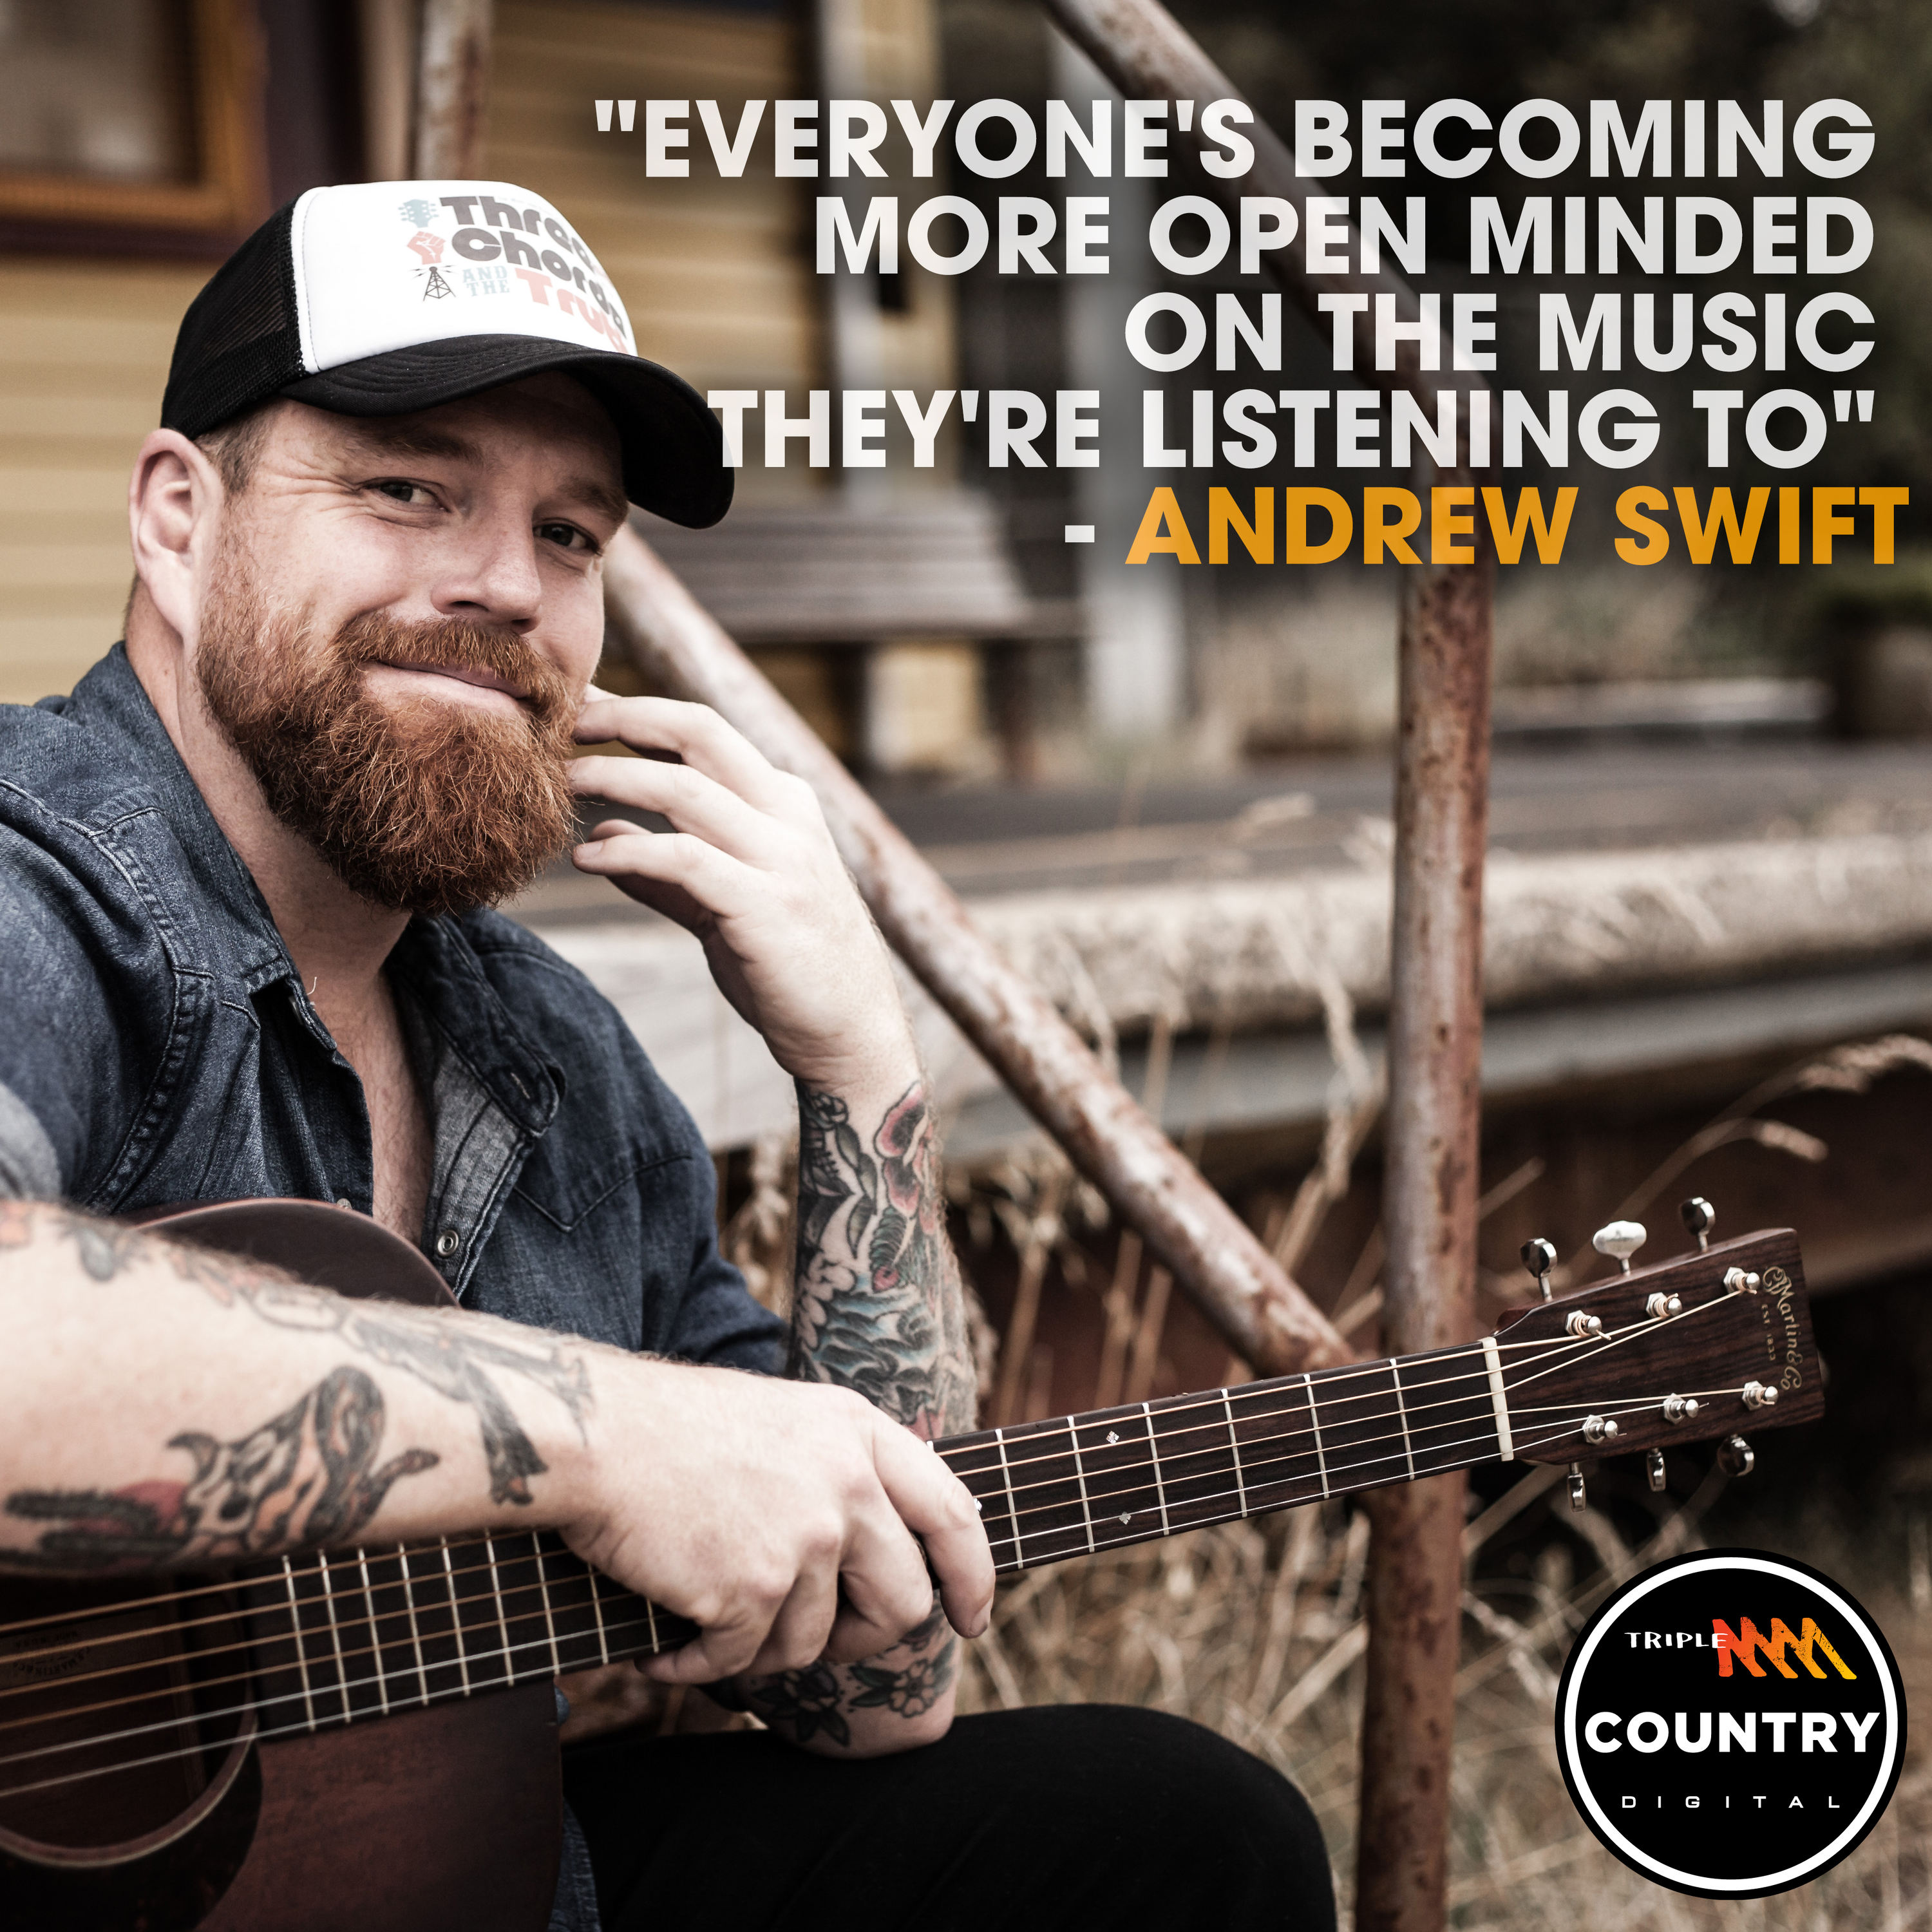 "Everyone's becoming more open minded on the music they're listening to" - Andrew Swift backstage at the Tamworth Country Music Festival